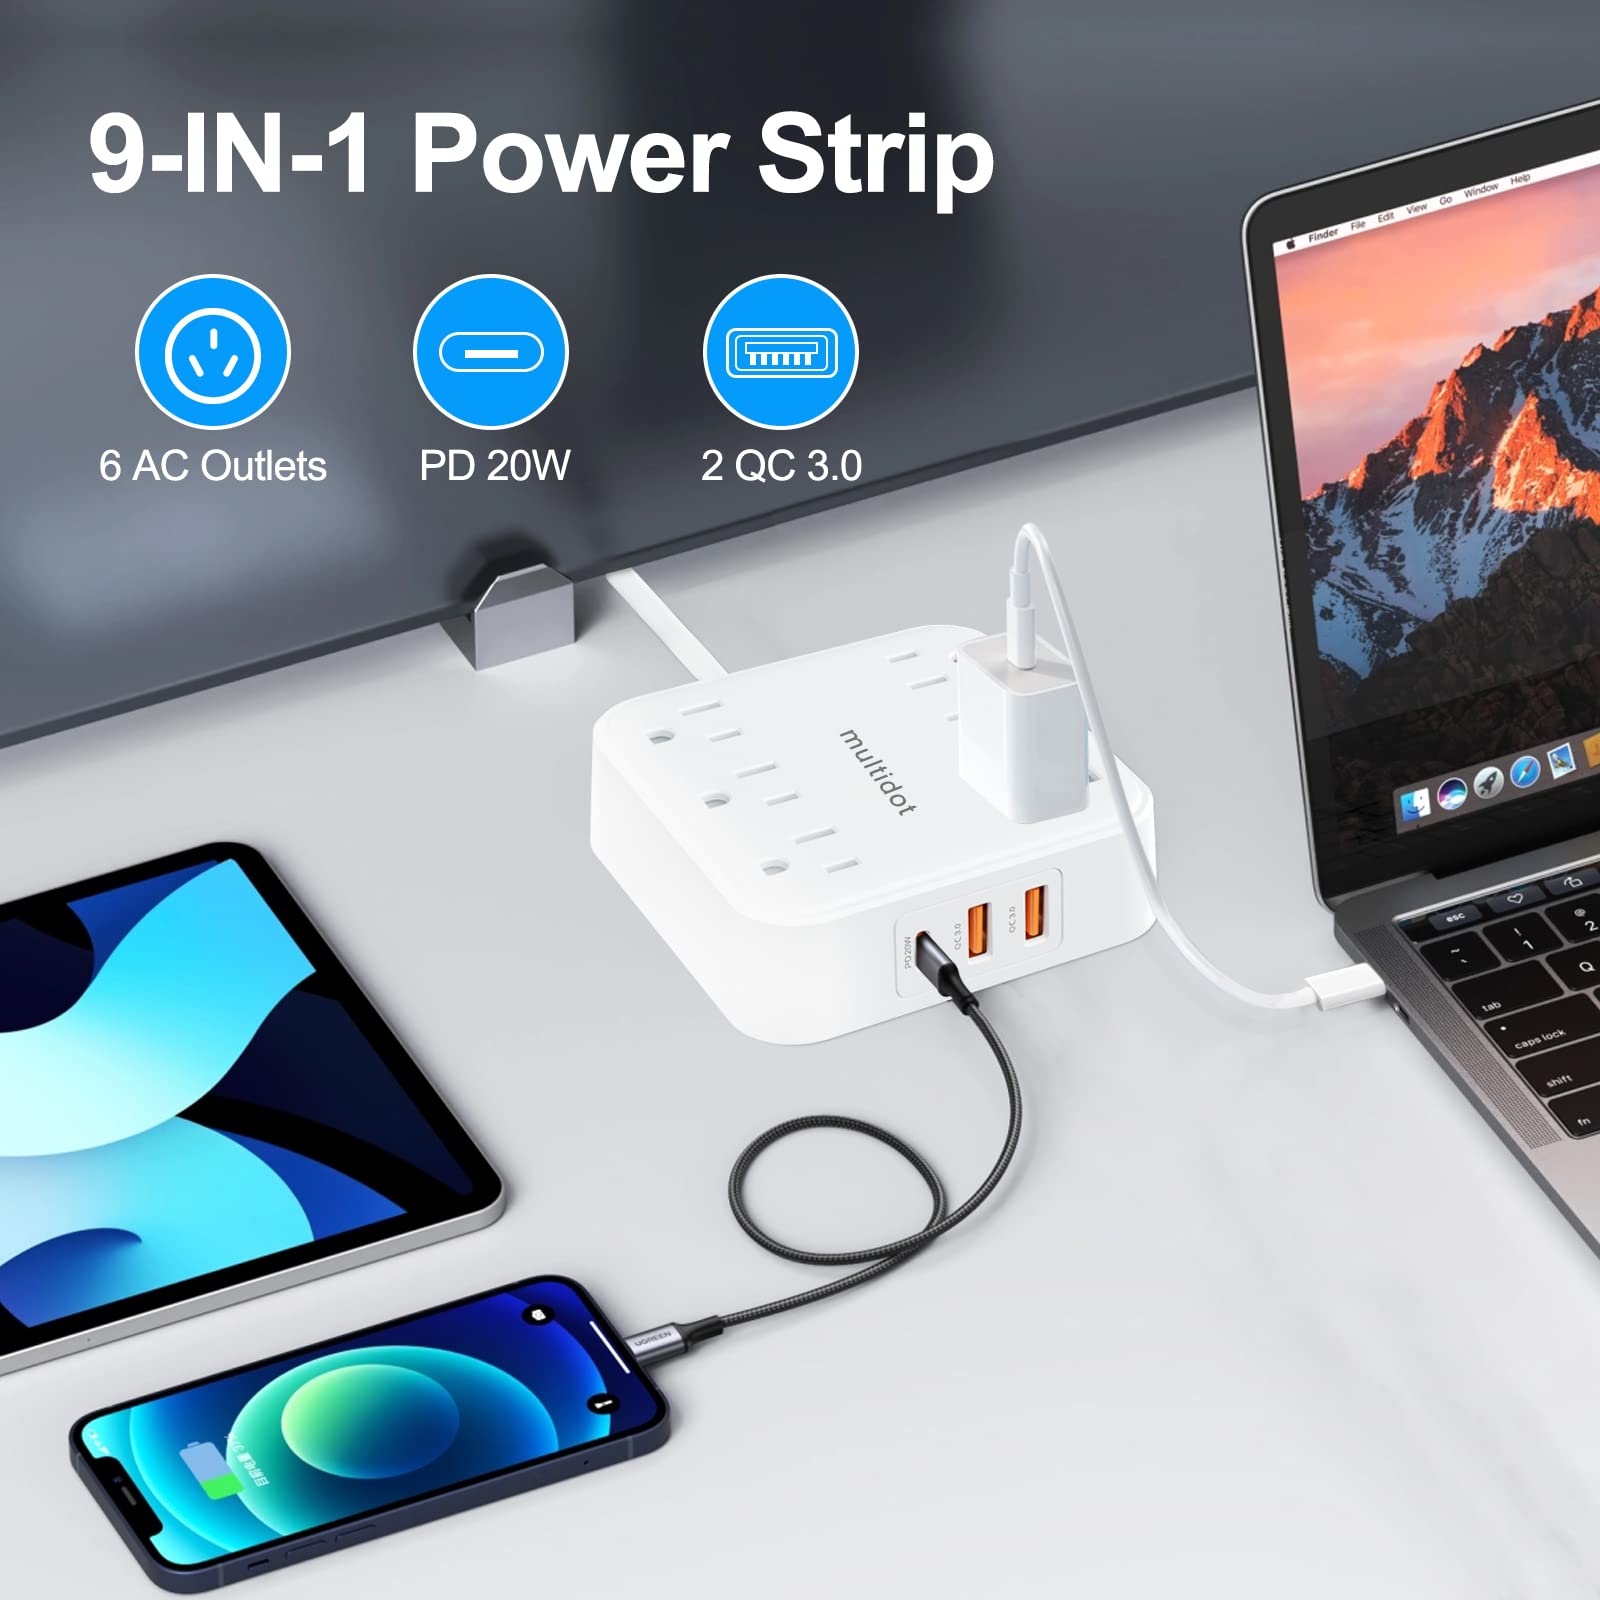 Power Strip with USB Ports - 6 AC Outlets, 2 QC 3.0 Ports & 1 PD20W Port for Charging Multiple Devices at Once